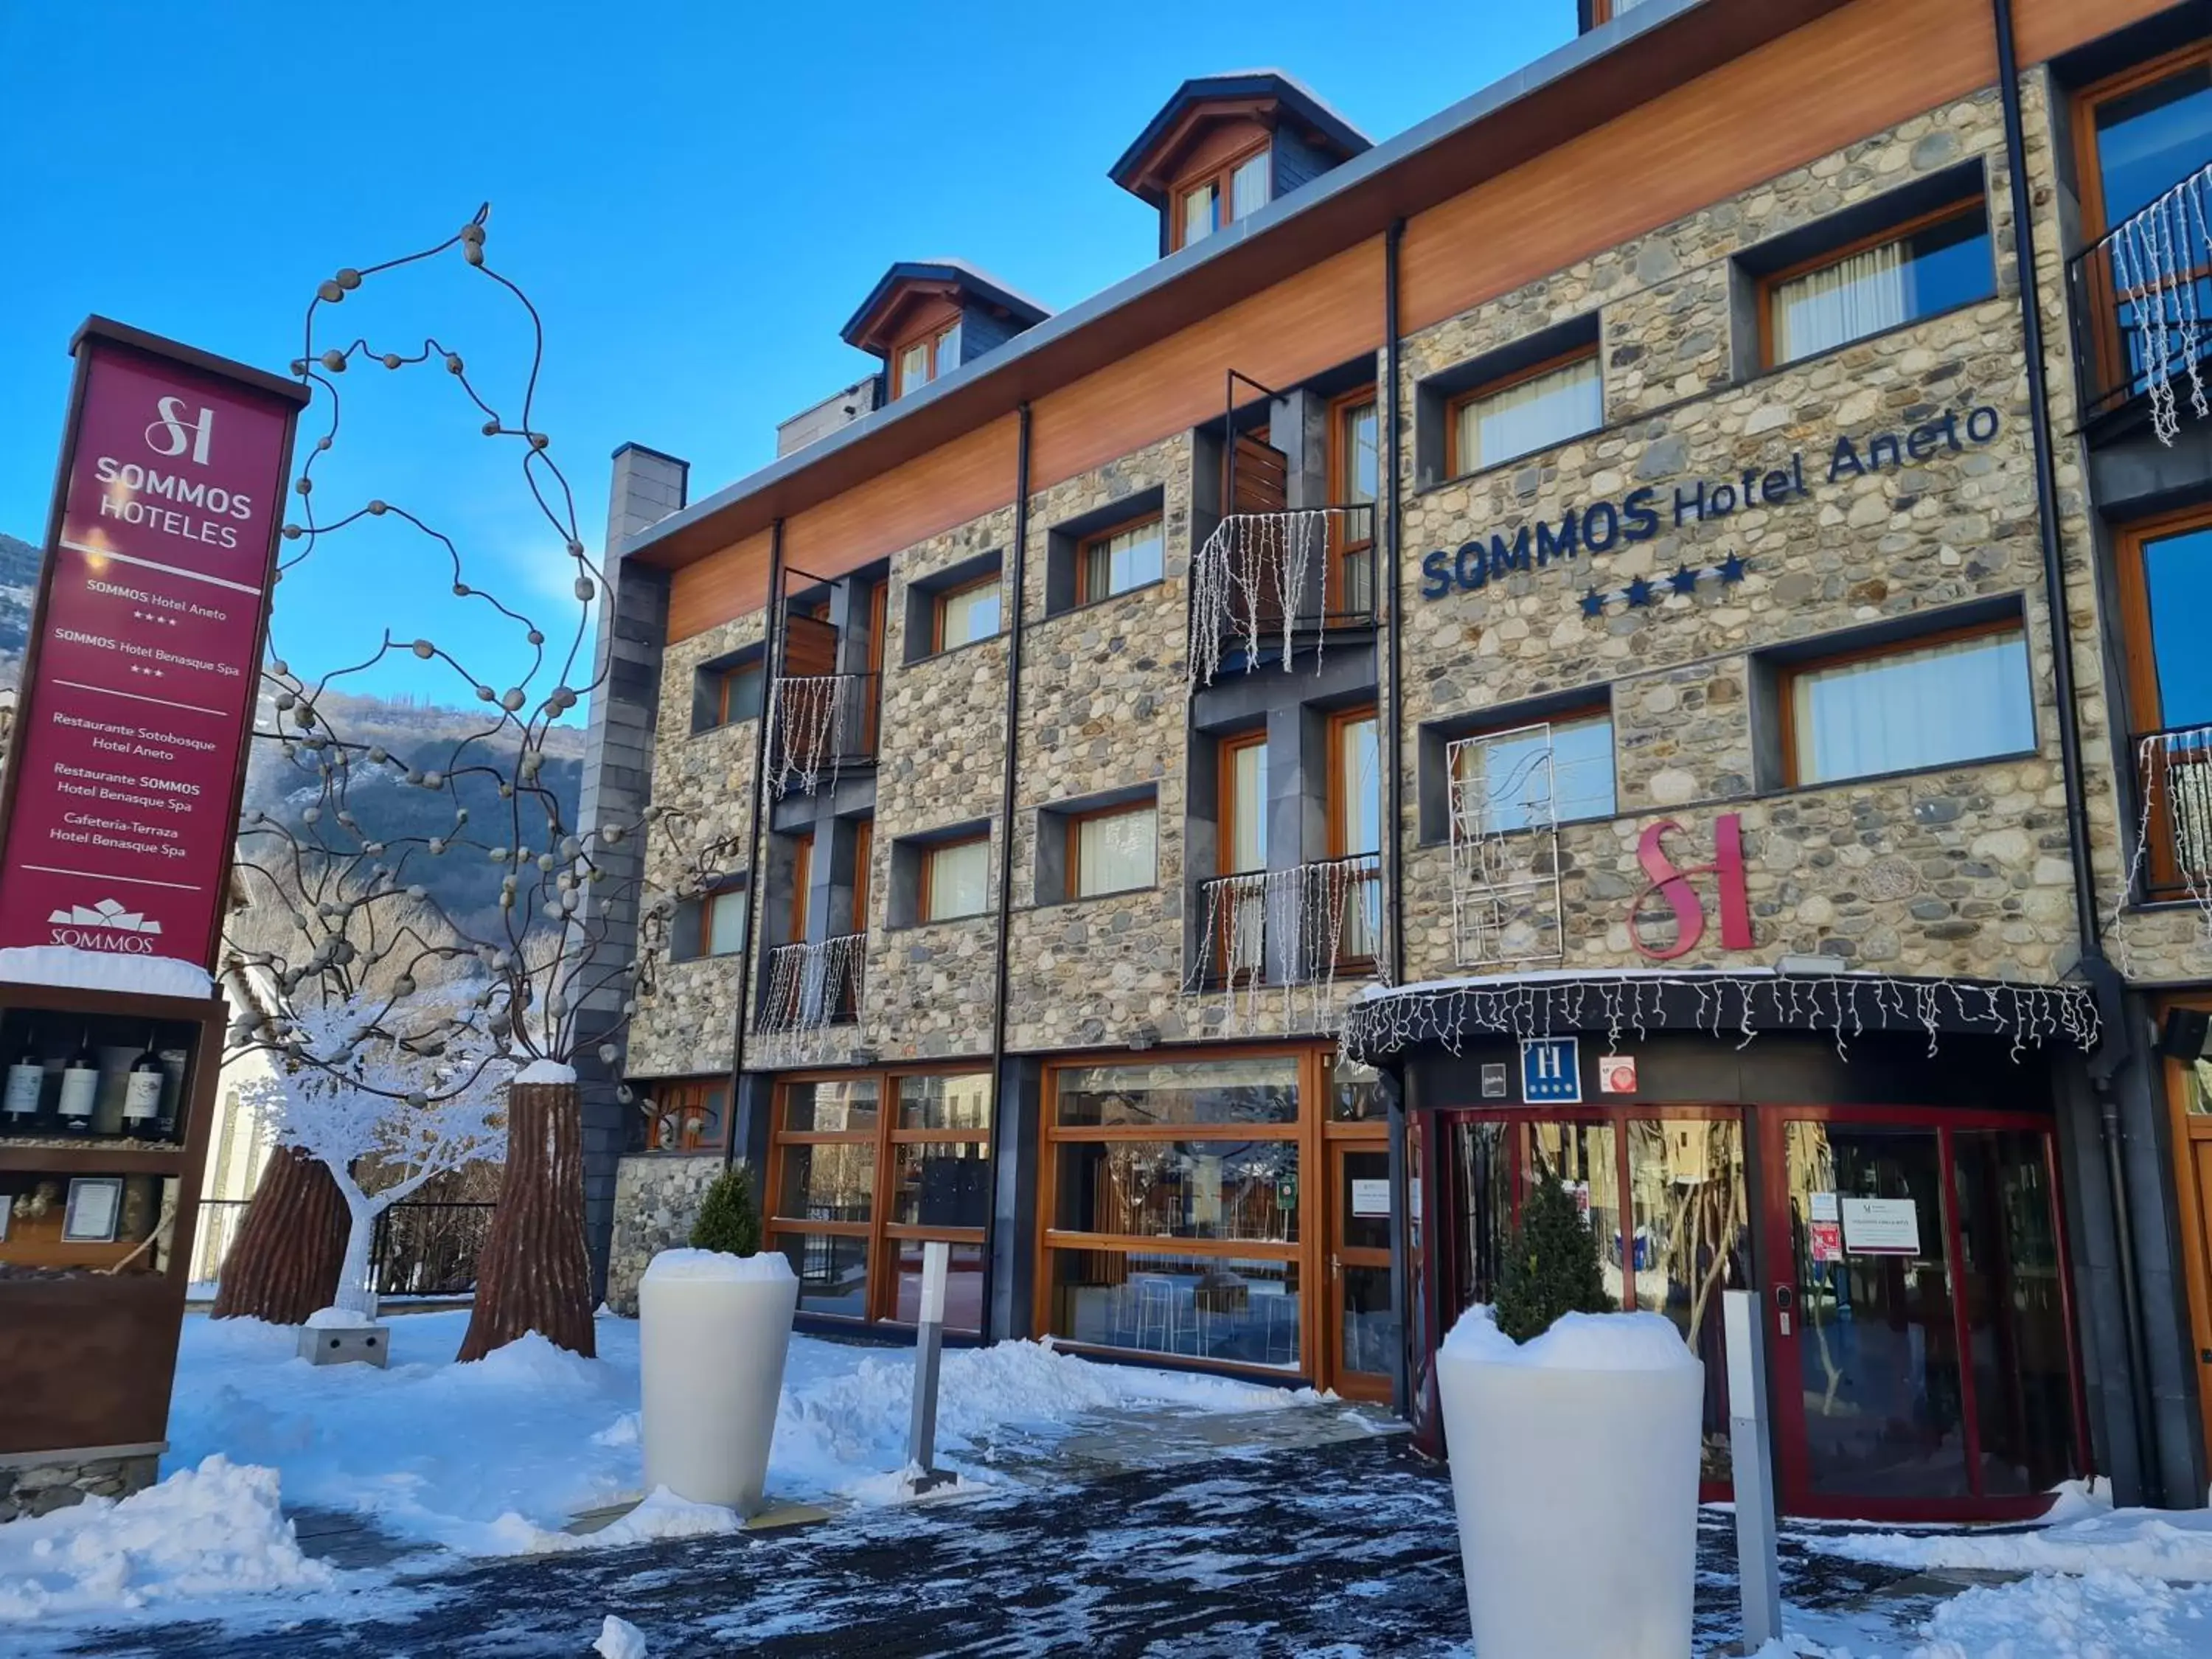 Property building, Winter in SOMMOS Hotel Aneto